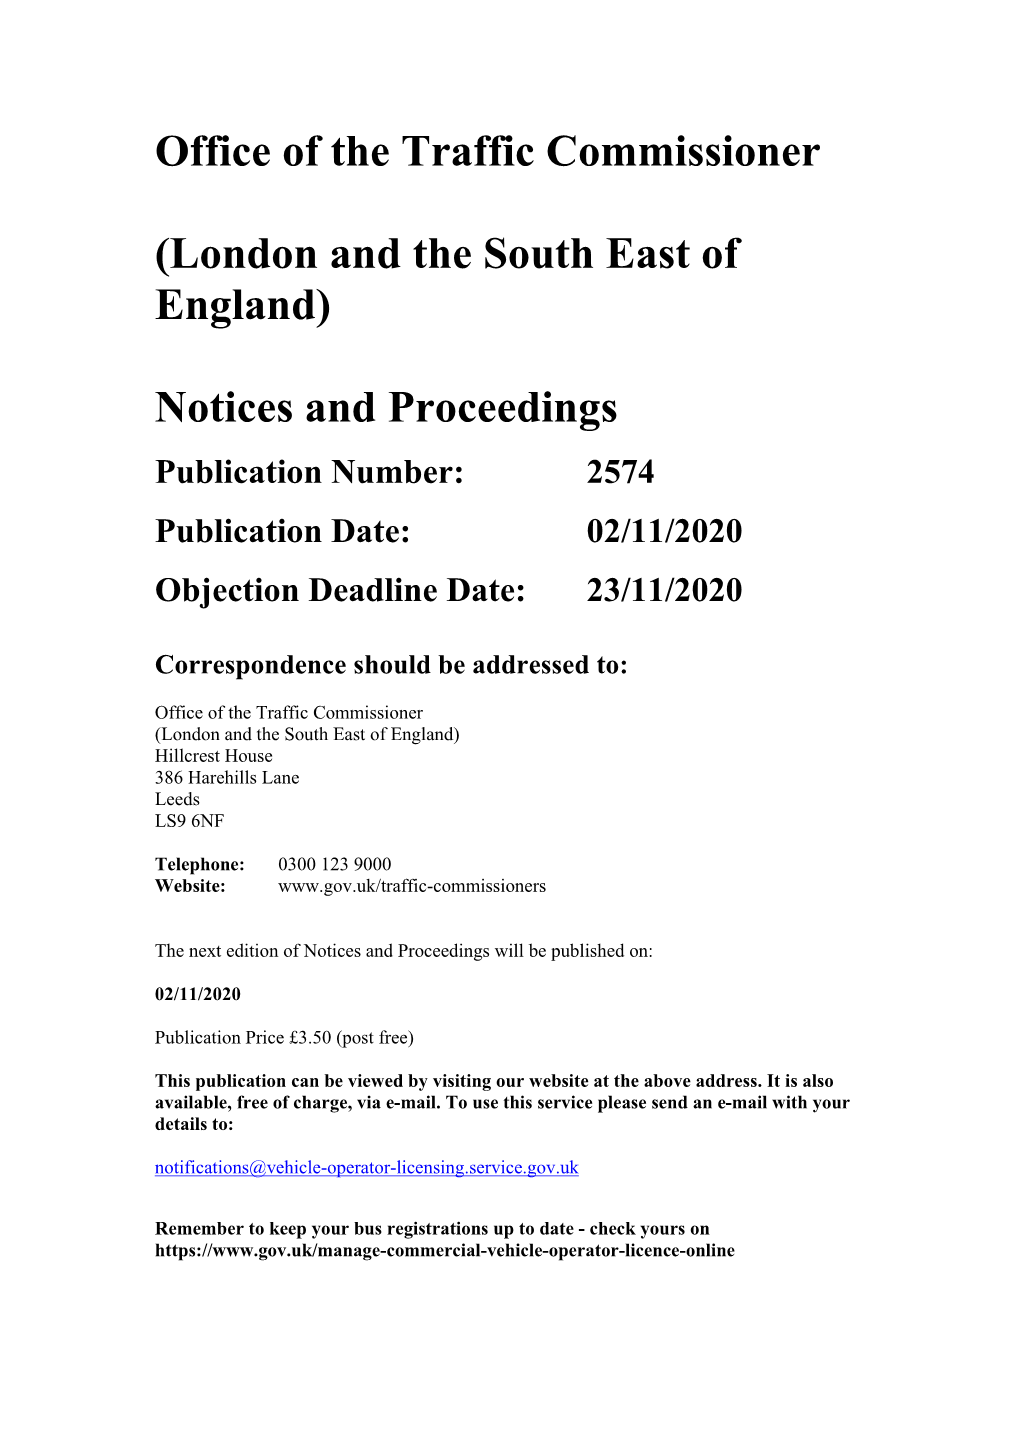 Notices and Proceedings for London and the South East of England 2574